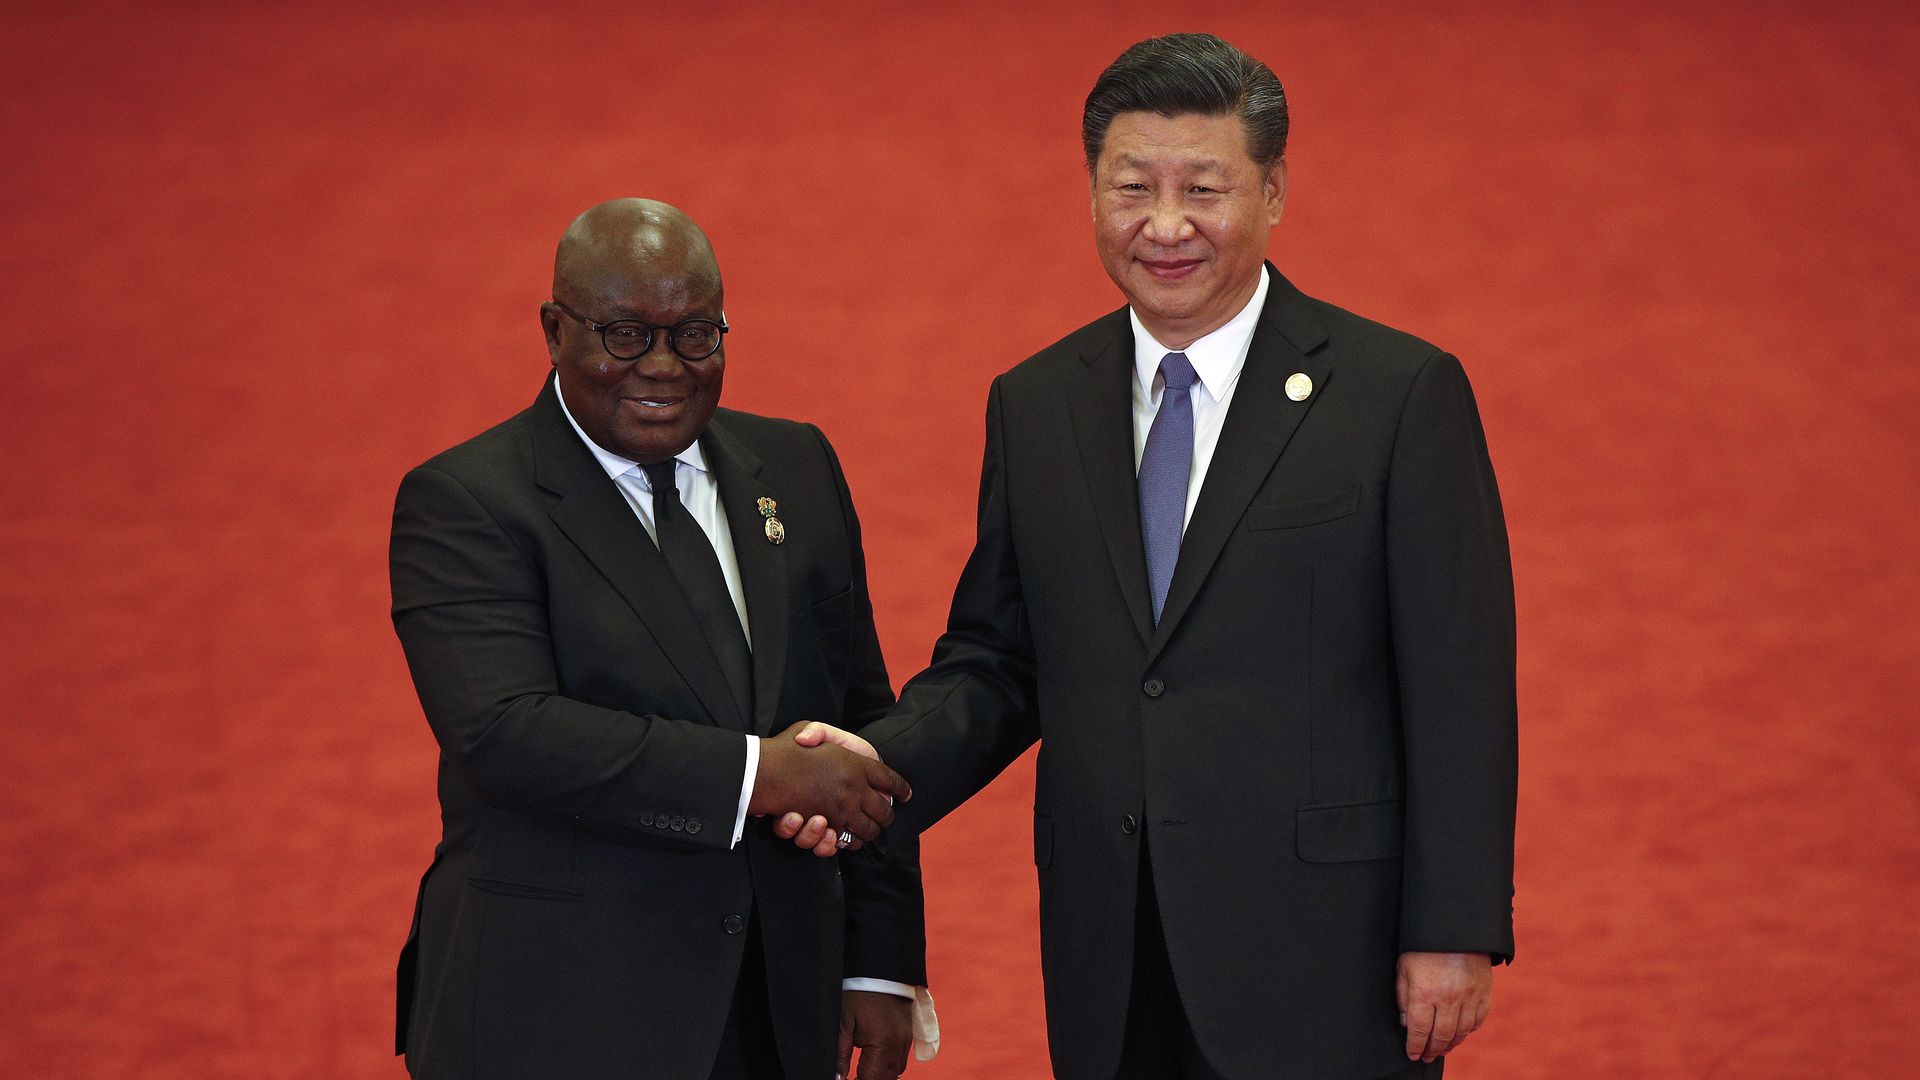 Ghana's President Nana Akufo-Addo, left, shakes hands with Chinese President Xi Jinping in Beijing on September 3, 2018 